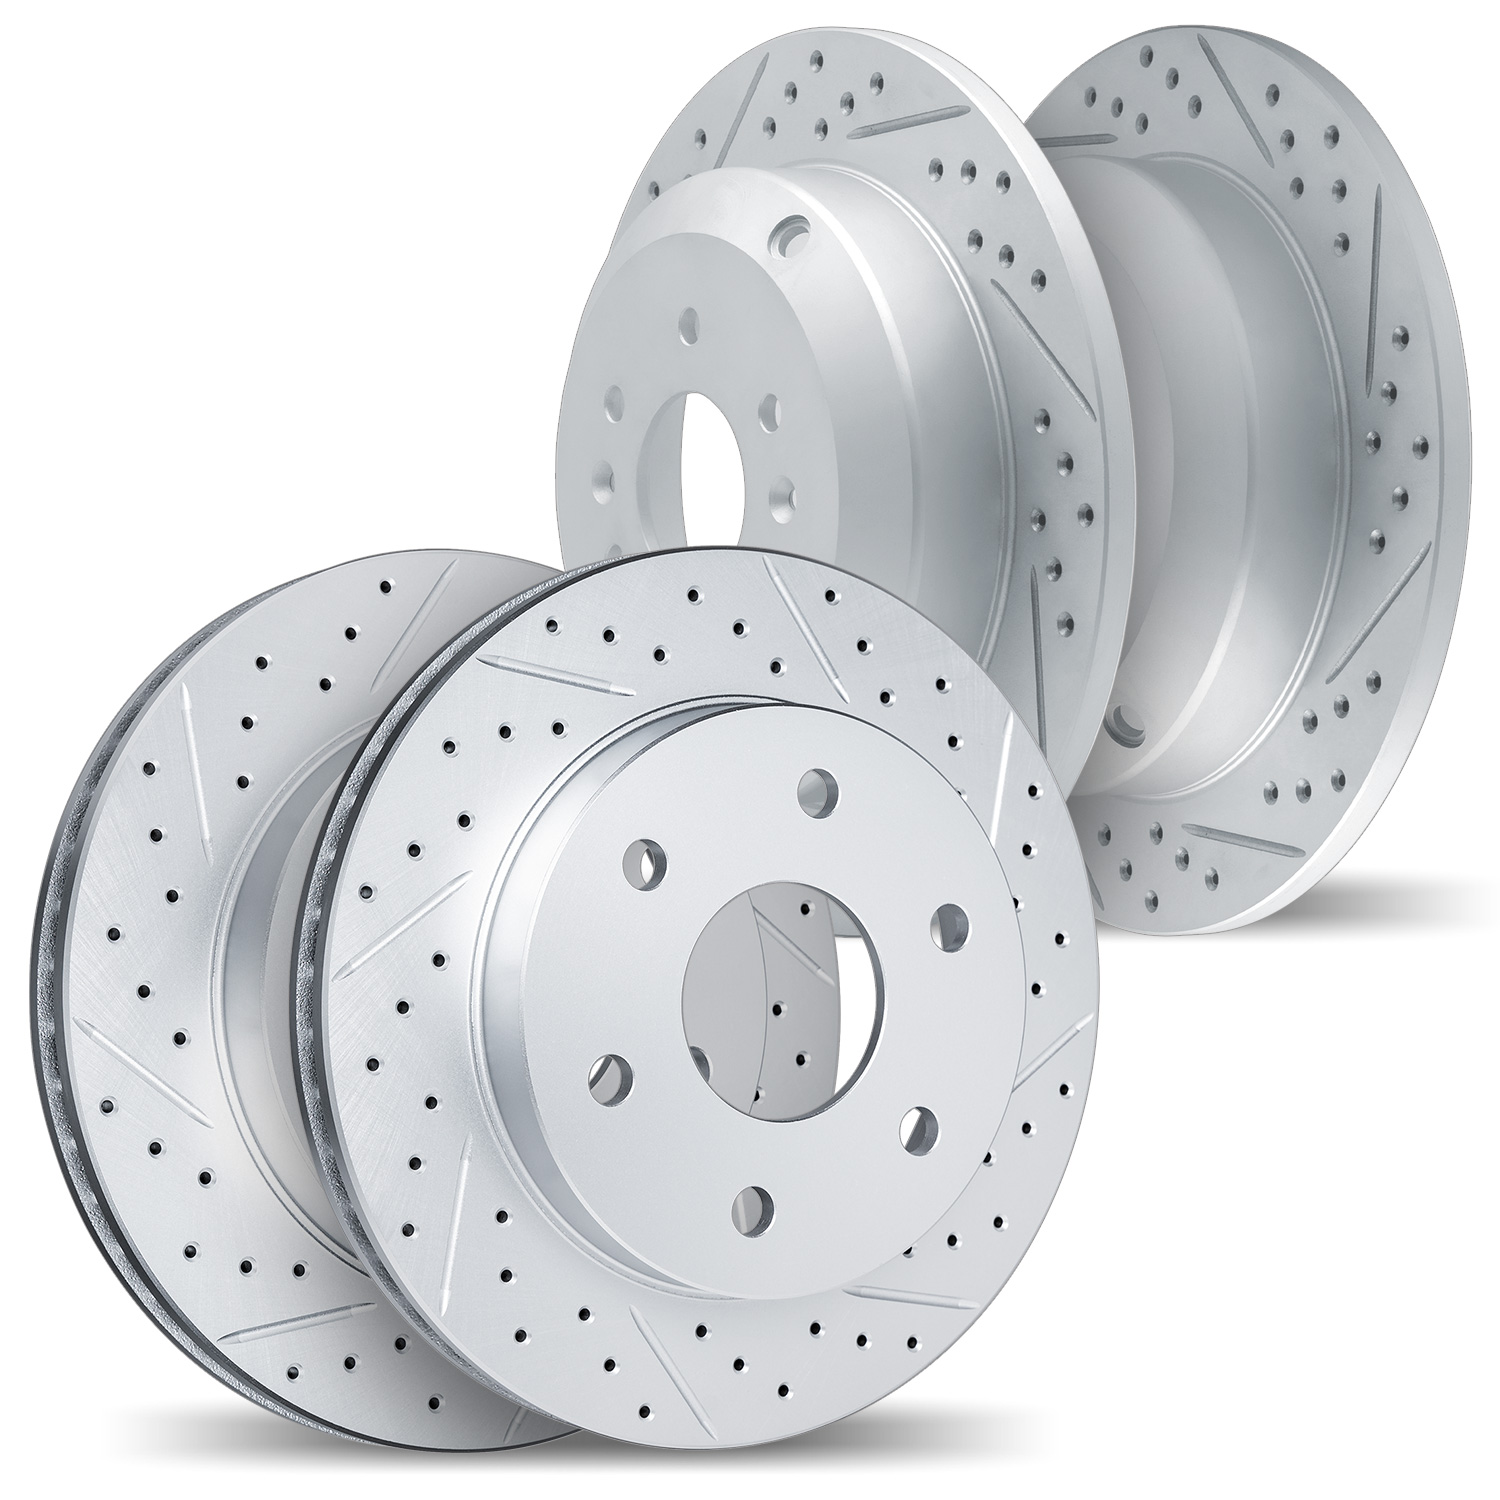 2004-21004 Geoperformance Drilled/Slotted Brake Rotors, 2009-2010 Kia/Hyundai/Genesis, Position: Front and Rear